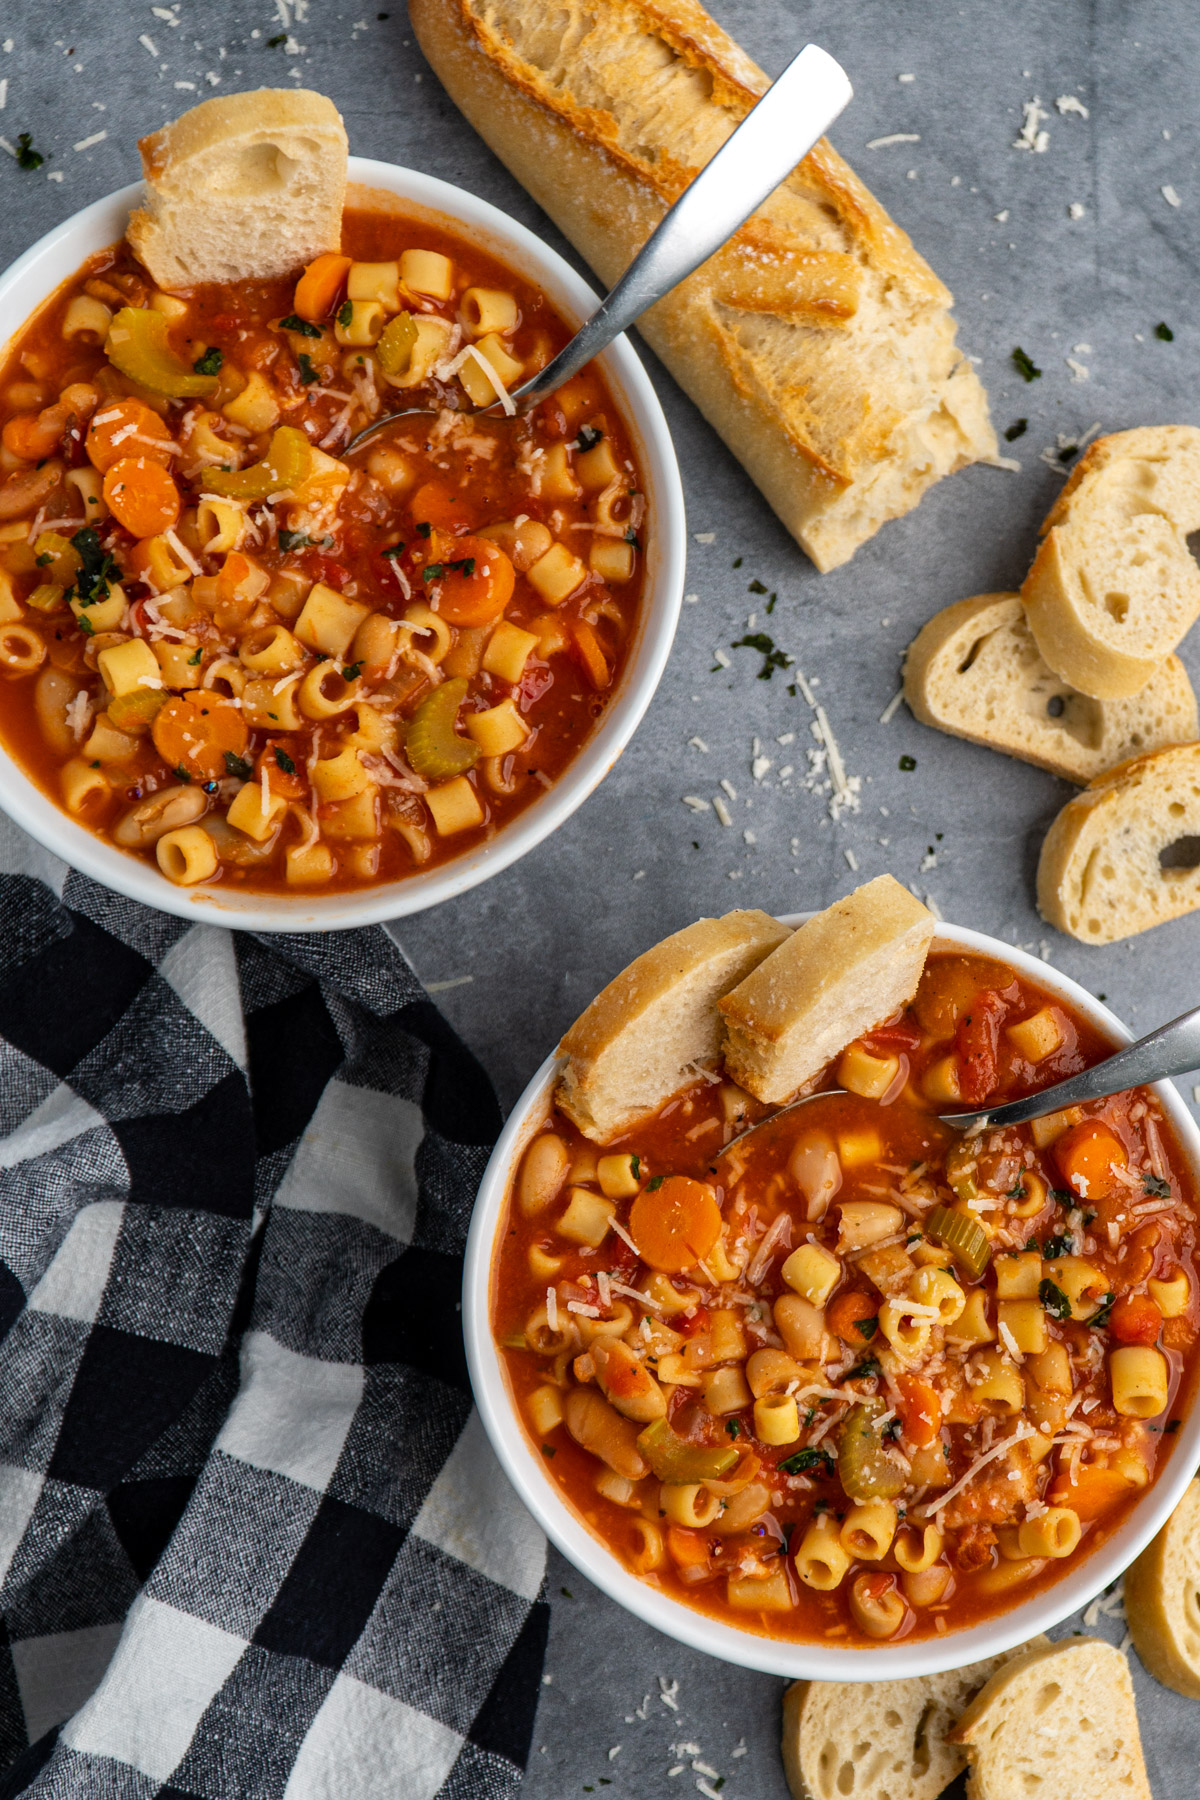 Two bowls of Crock-Pot pasta fagioli with slices of baguette in them.